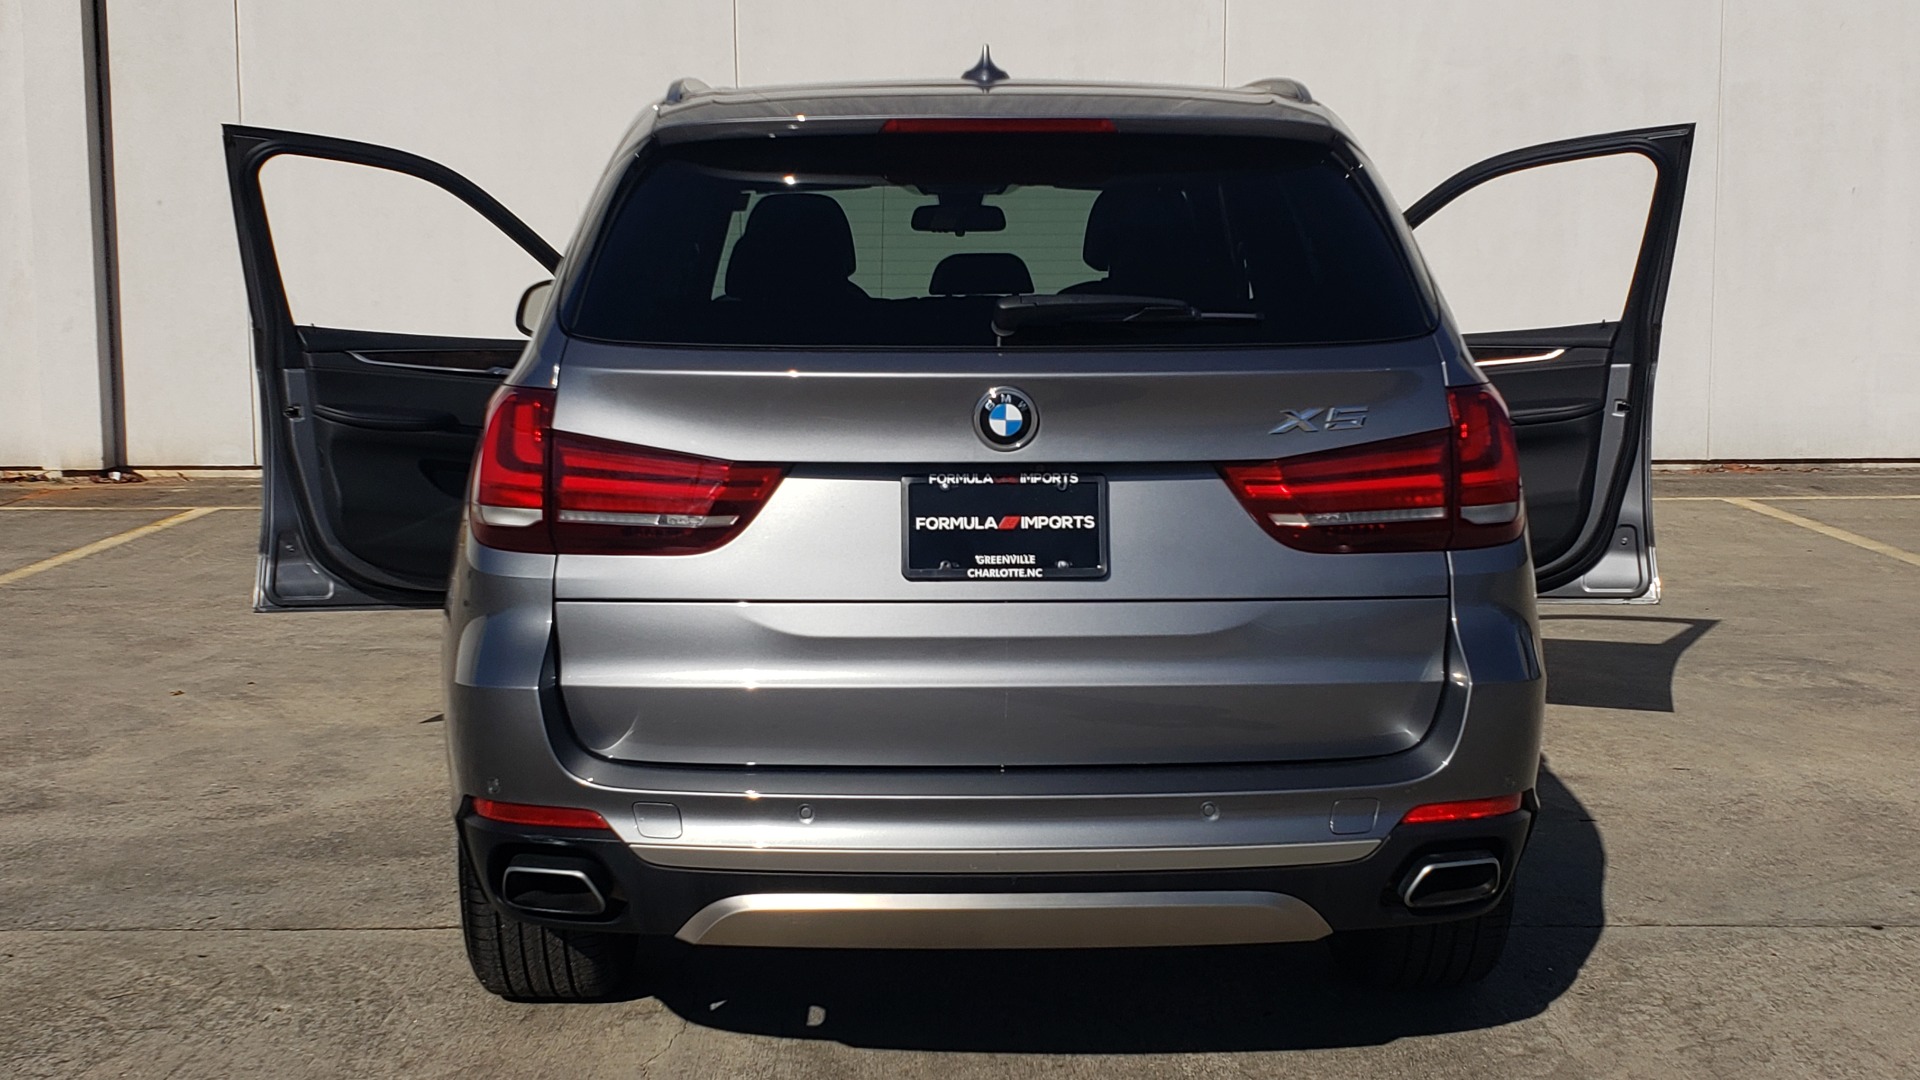 Used 2018 BMW X5 XDRIVE35I PREMIUM 3.0L SUV / DRVR ASST / NAV / HUD / SUNROOF / REARVIEW for sale $40,995 at Formula Imports in Charlotte NC 28227 29